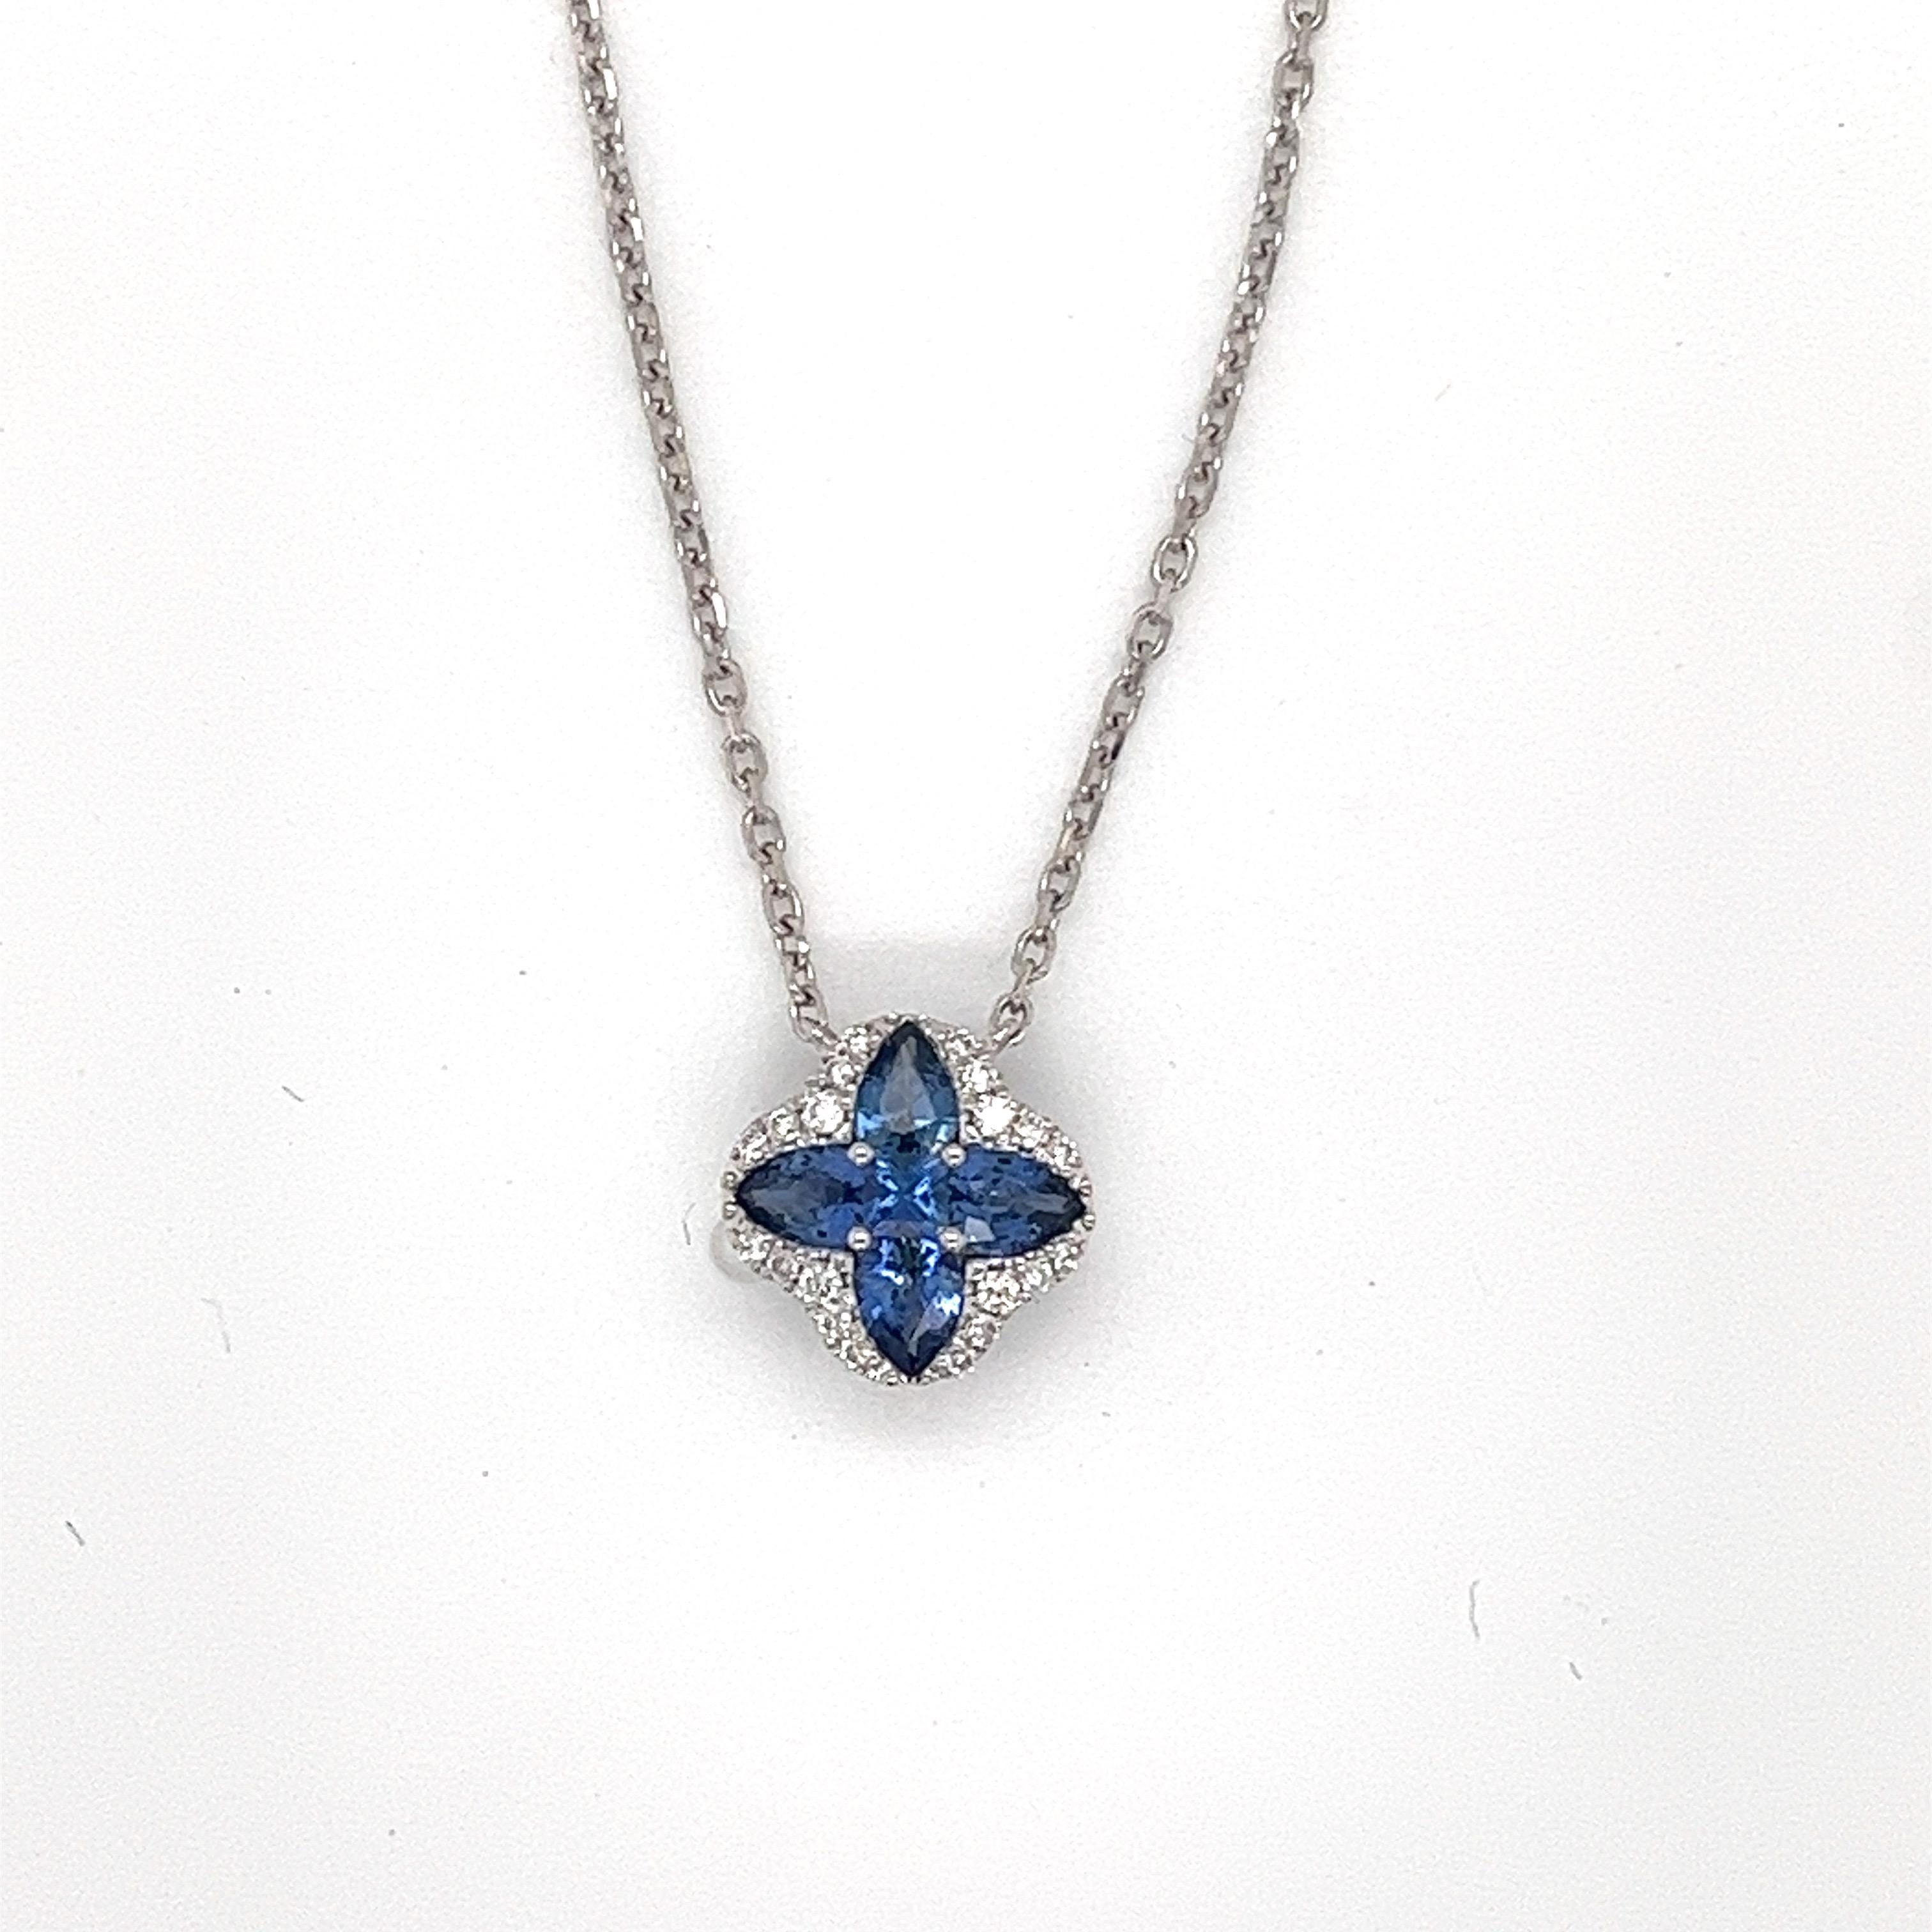 4 Pear shape sapphires weighing .71 cts
1 princess cut sapphire weighing .08 cts
20 round diamonds weighing .09 cts
H-SI
Set in 18k white gold necklace
2.7 grams
Adjustable white chain 16-18 in